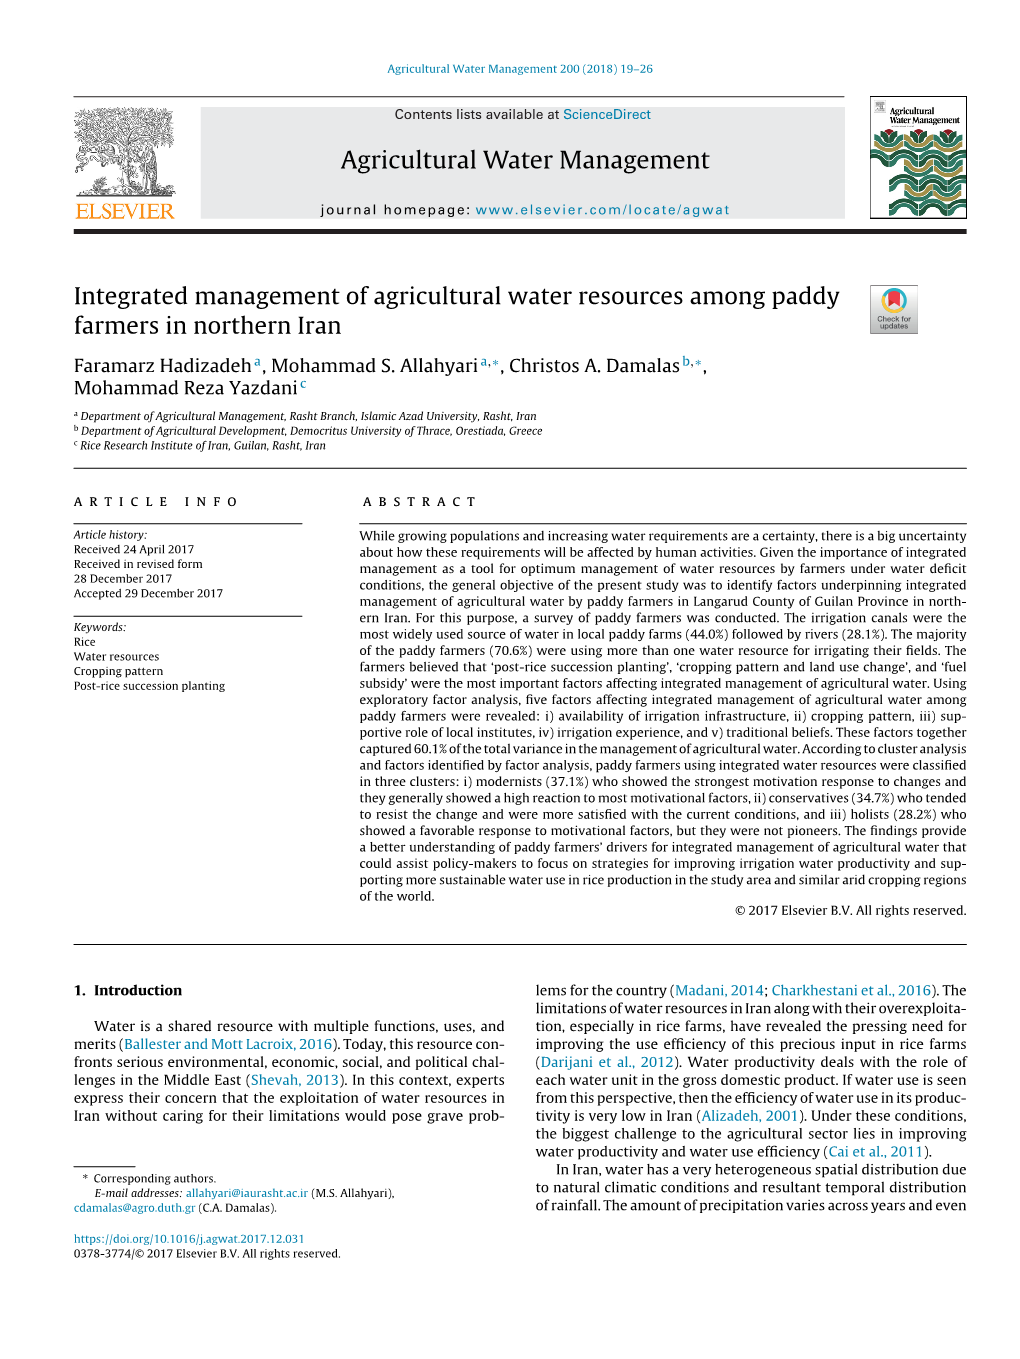 Integrated Management of Agricultural Water Resources Among Paddy